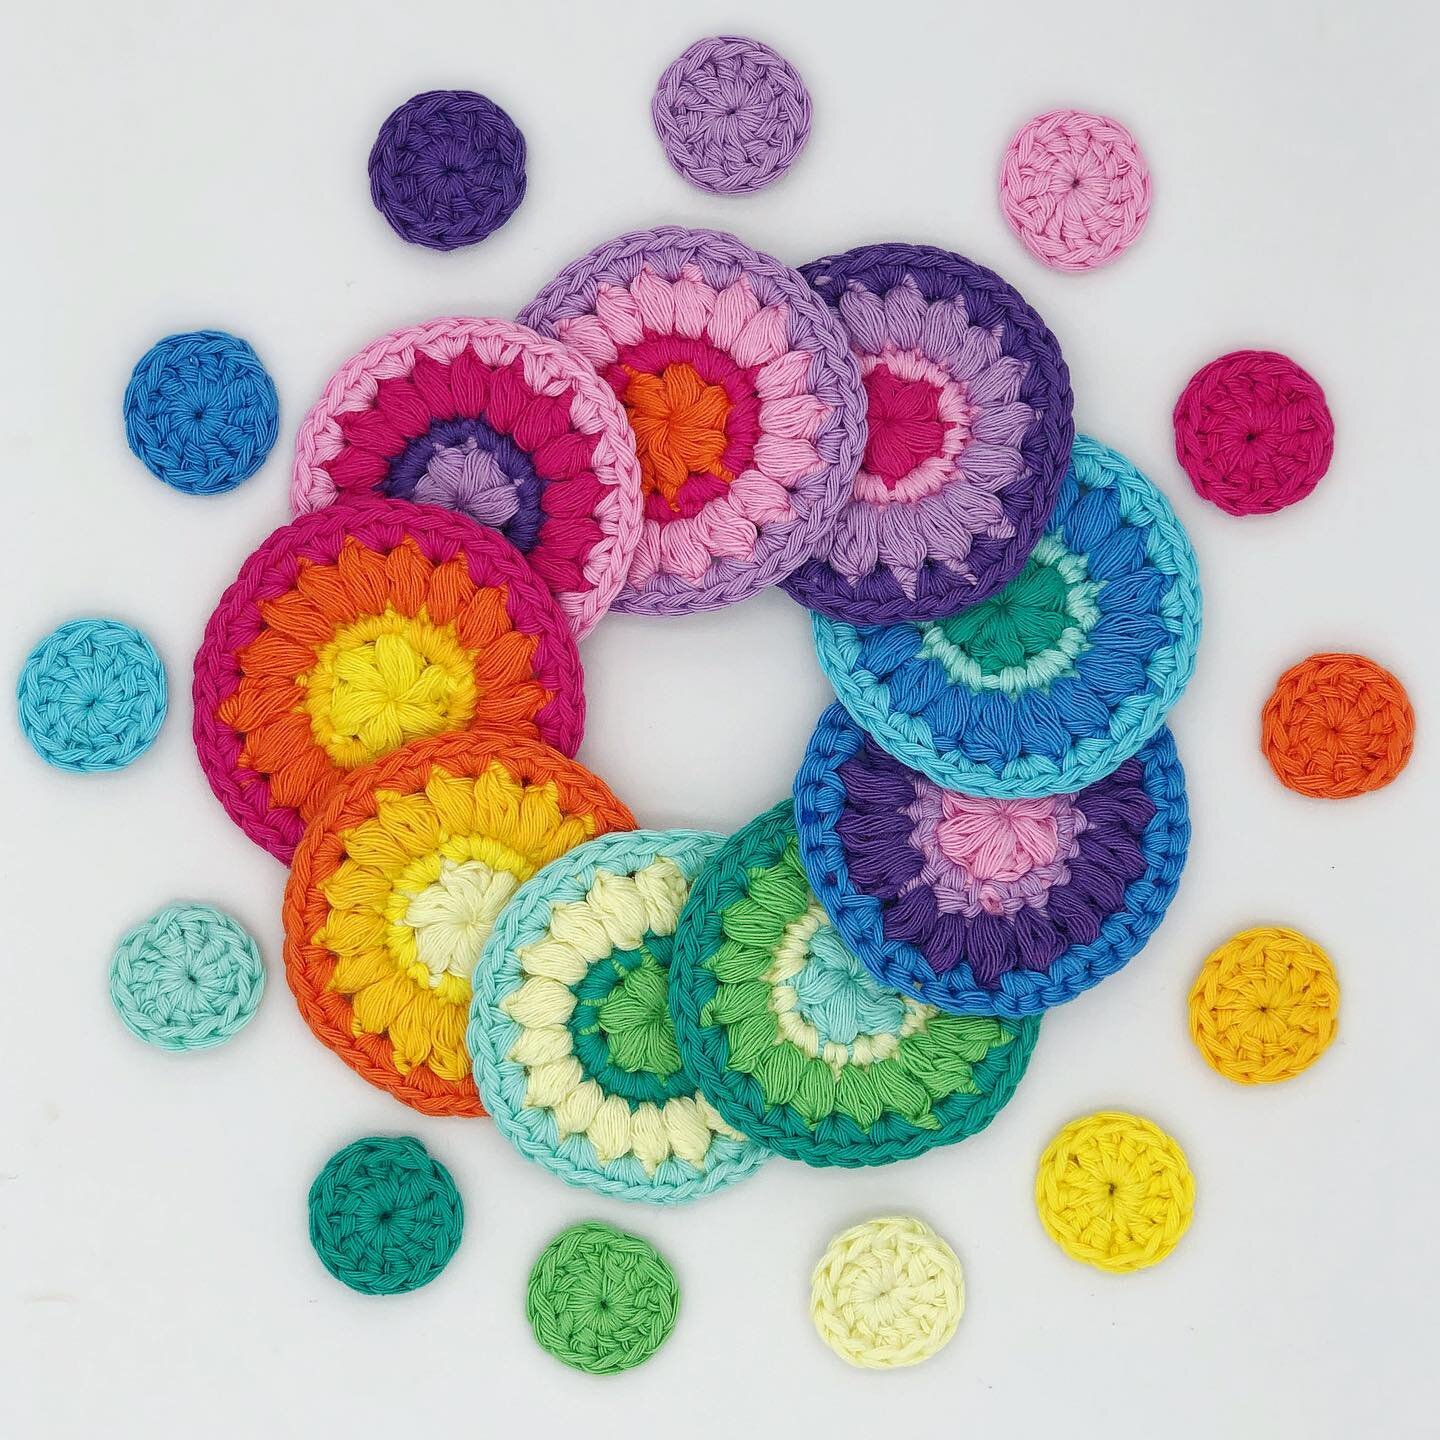 A little crochet rainbow 🌈 that I made for my book Colourful Crochet which honestly feels like another lifetime ago now&hellip;pre Covid days!!! 🌈
I&rsquo;m thinking I will do a colour workshop here to help all those who find choosing colours a lit